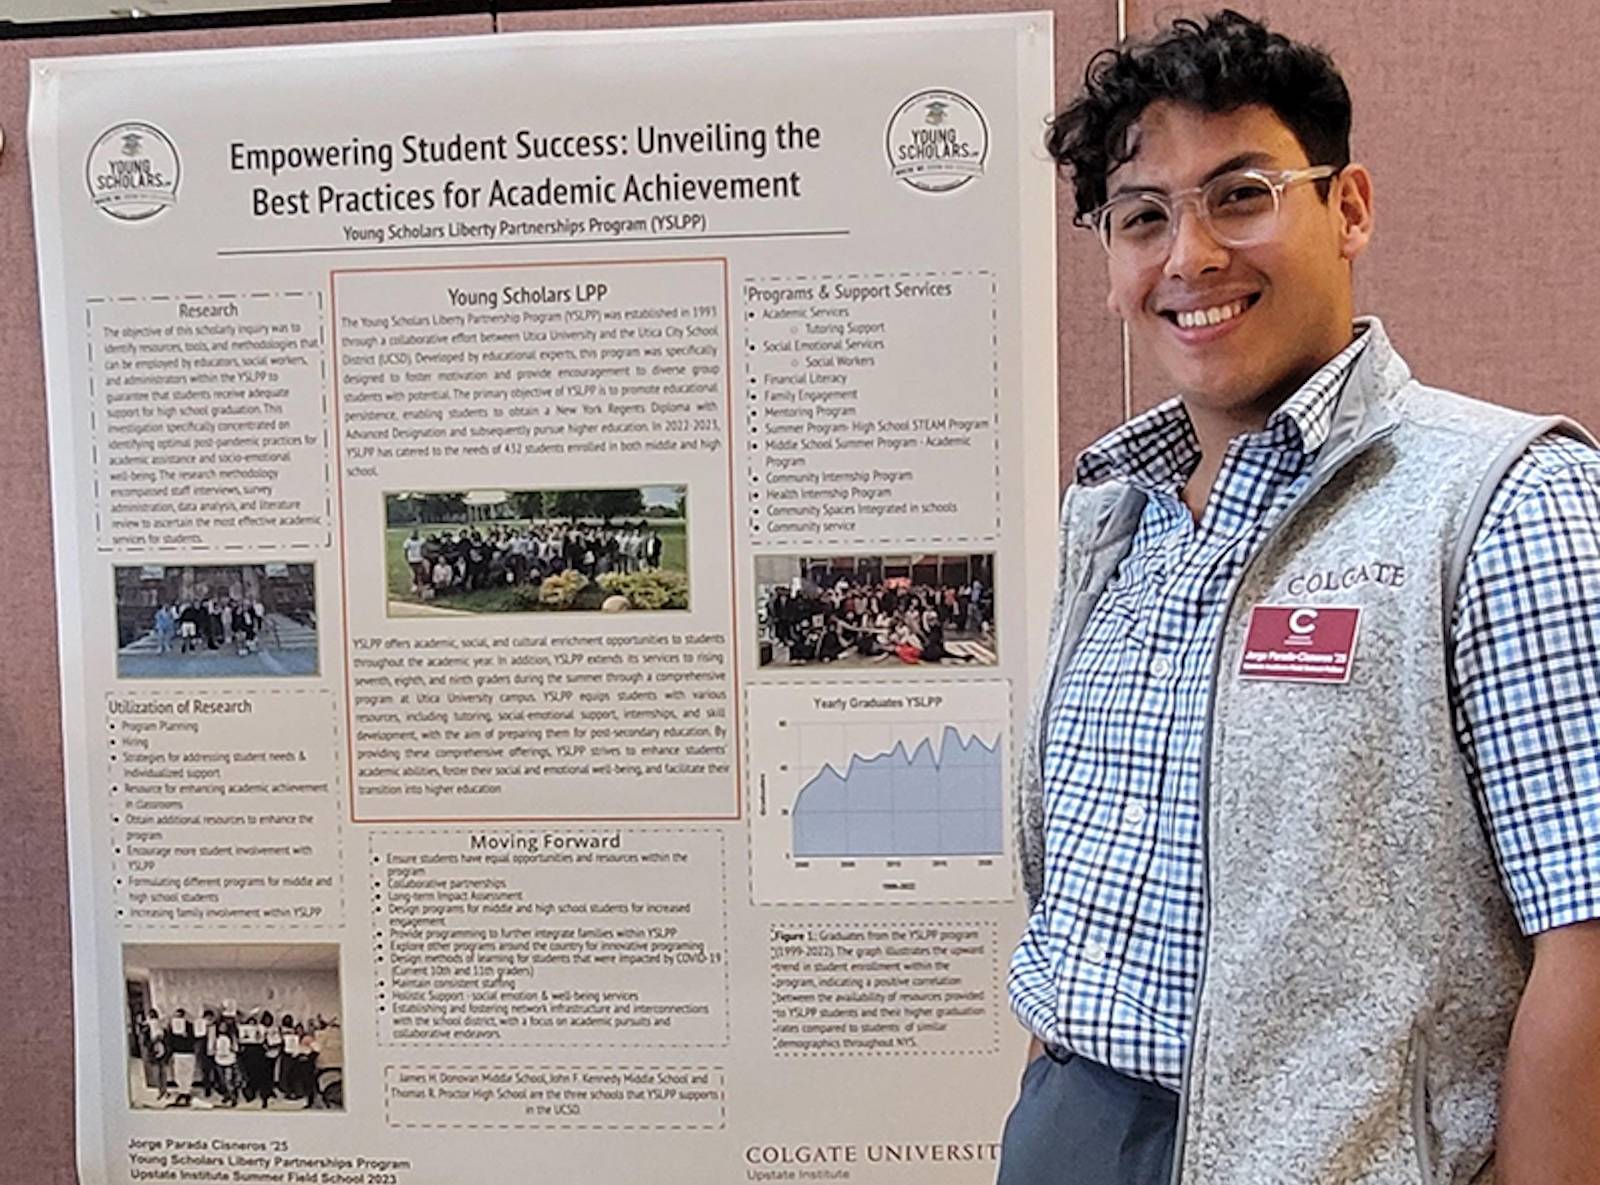 Jorge stands in front of his research poster about the Young Scholars program